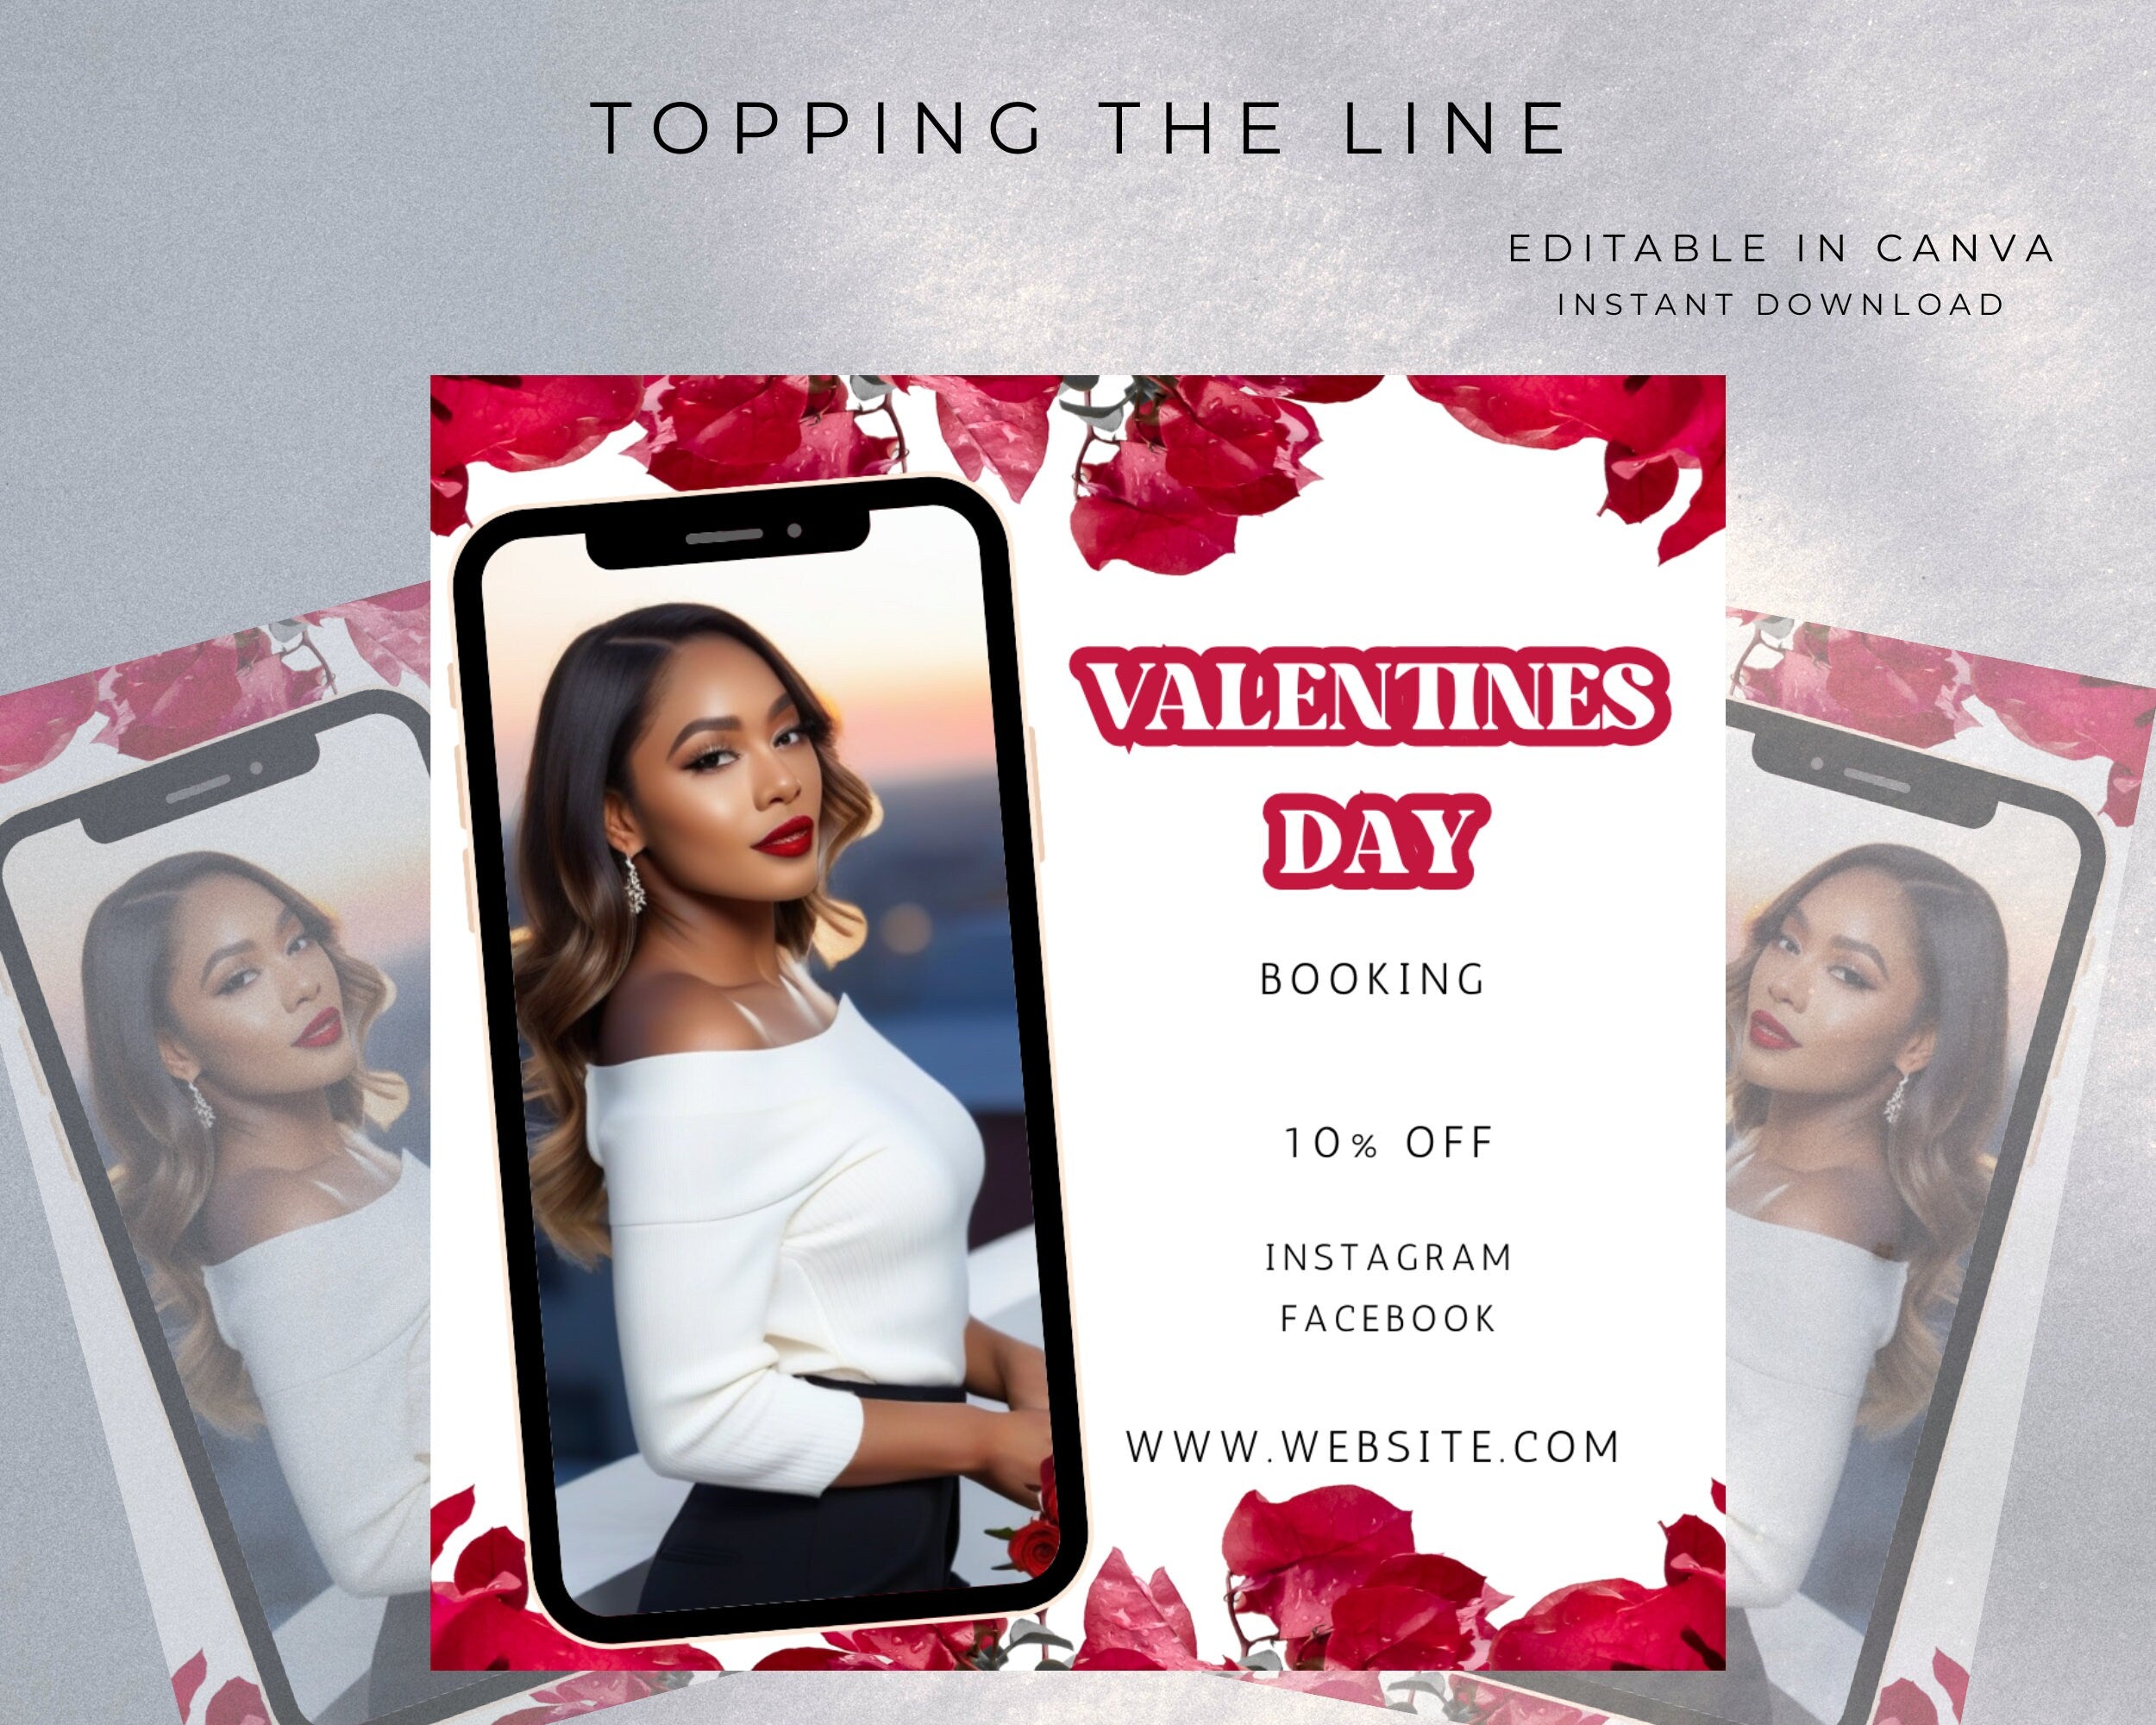 Valentine Booking Flyer Template, Shop Now, Book Now, You Edit in Canva, Stock Model image, Flyer, DIY,  Digital Download